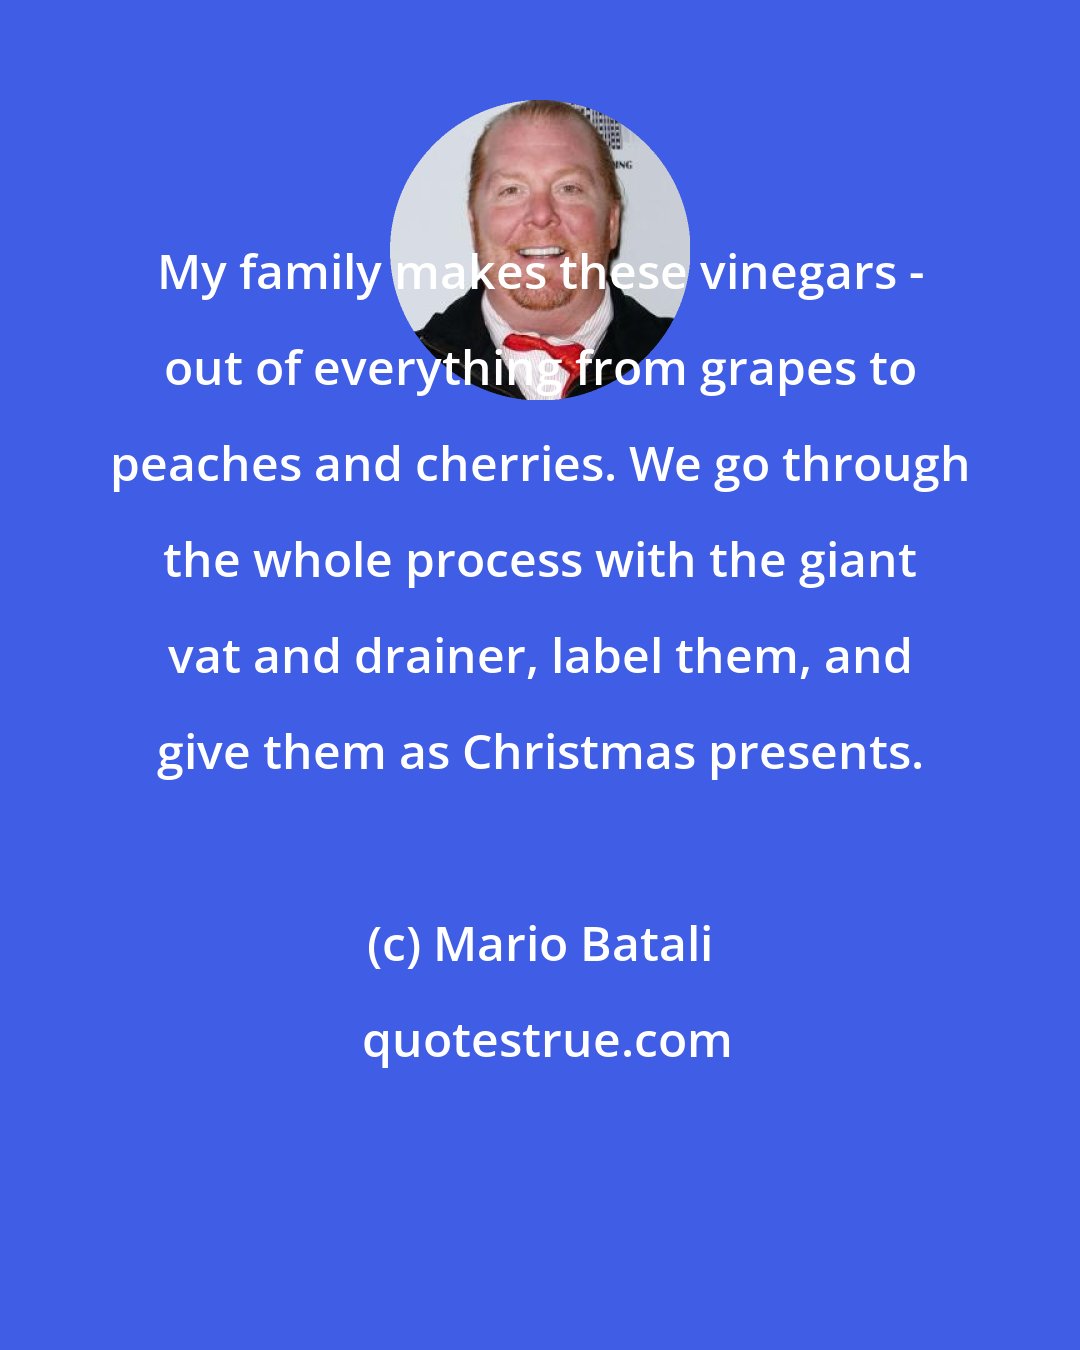 Mario Batali: My family makes these vinegars - out of everything from grapes to peaches and cherries. We go through the whole process with the giant vat and drainer, label them, and give them as Christmas presents.